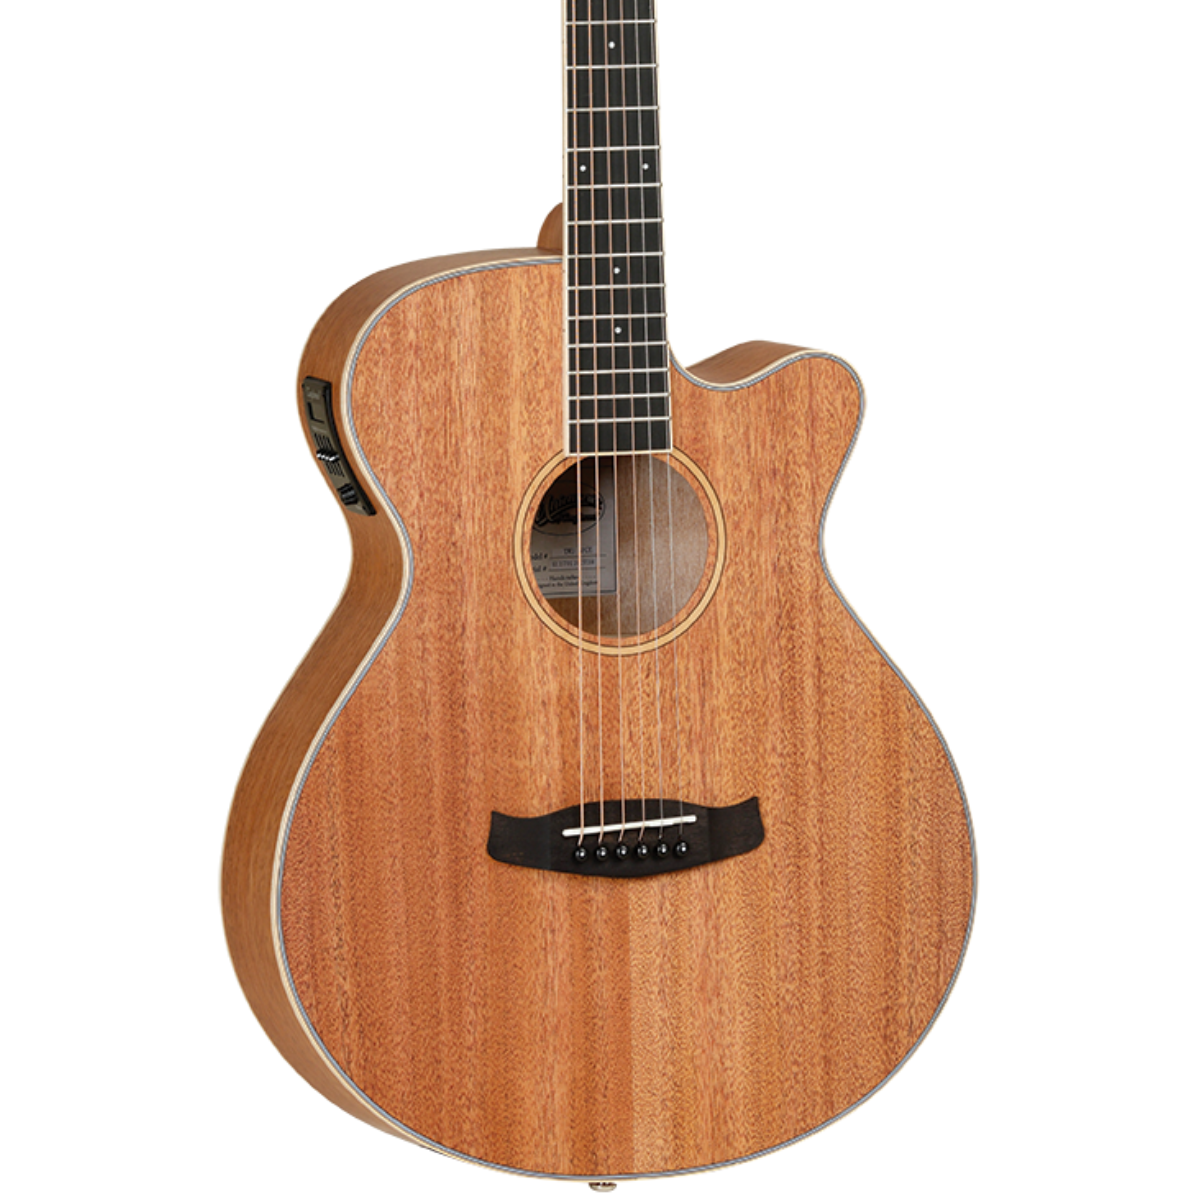 Tanglewood Union Superfolk Acoustic Guitar